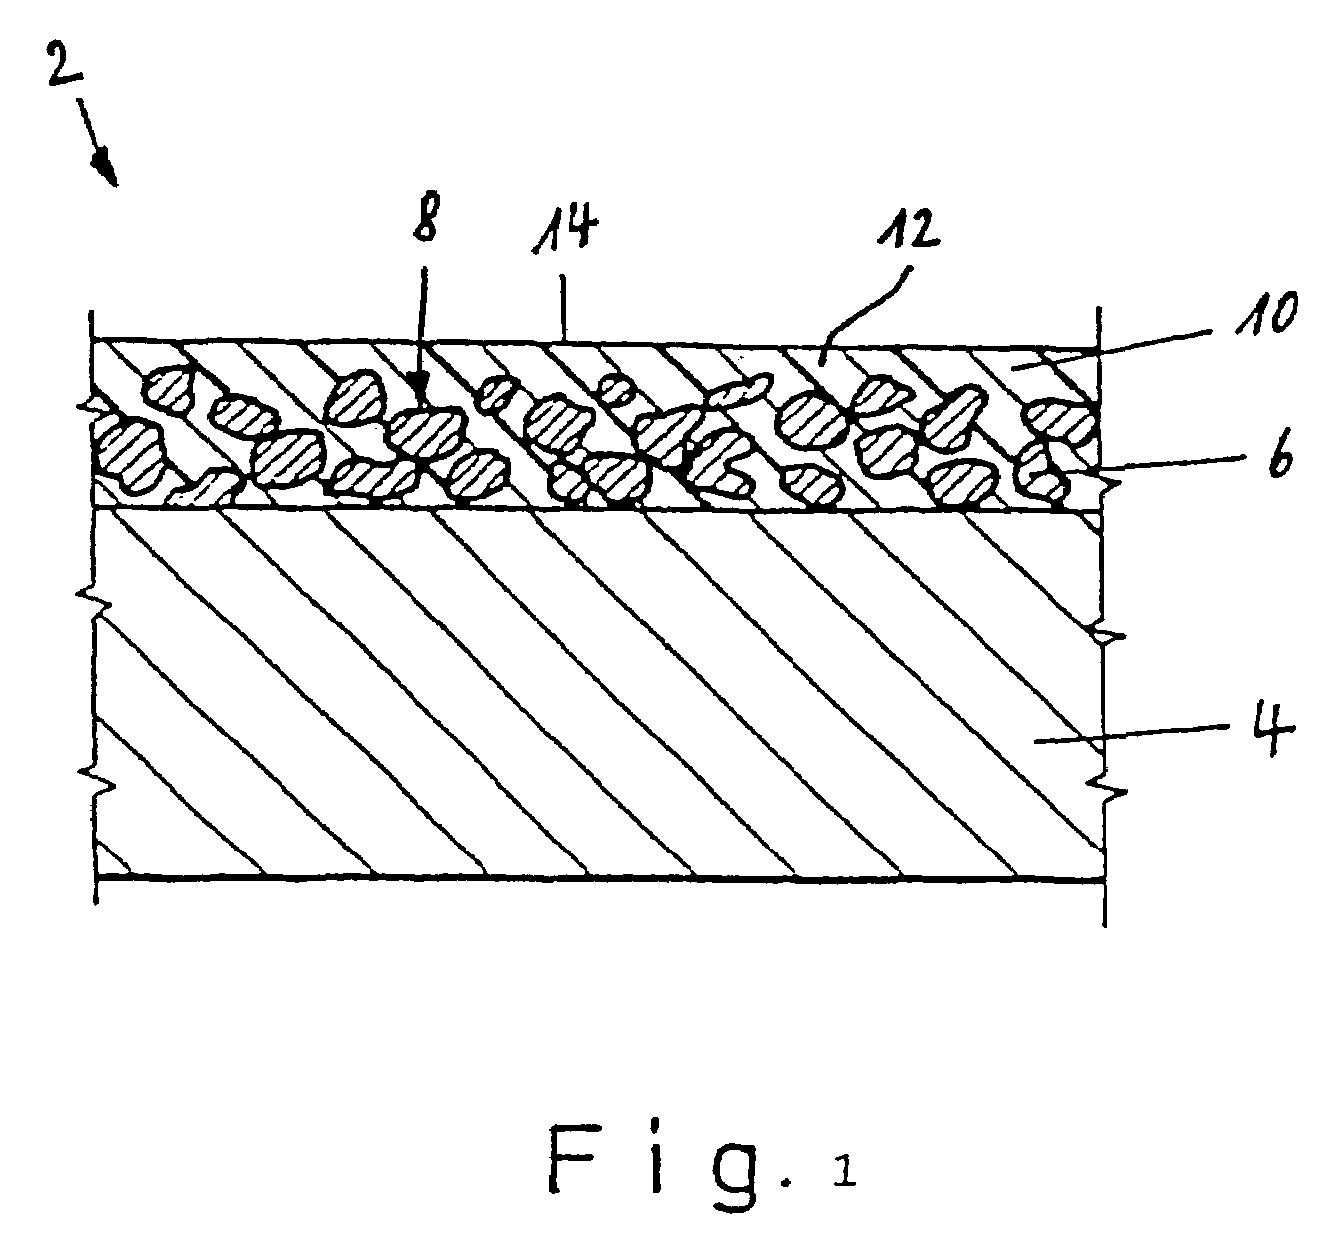 Friction bearing composite material with a metal base layer